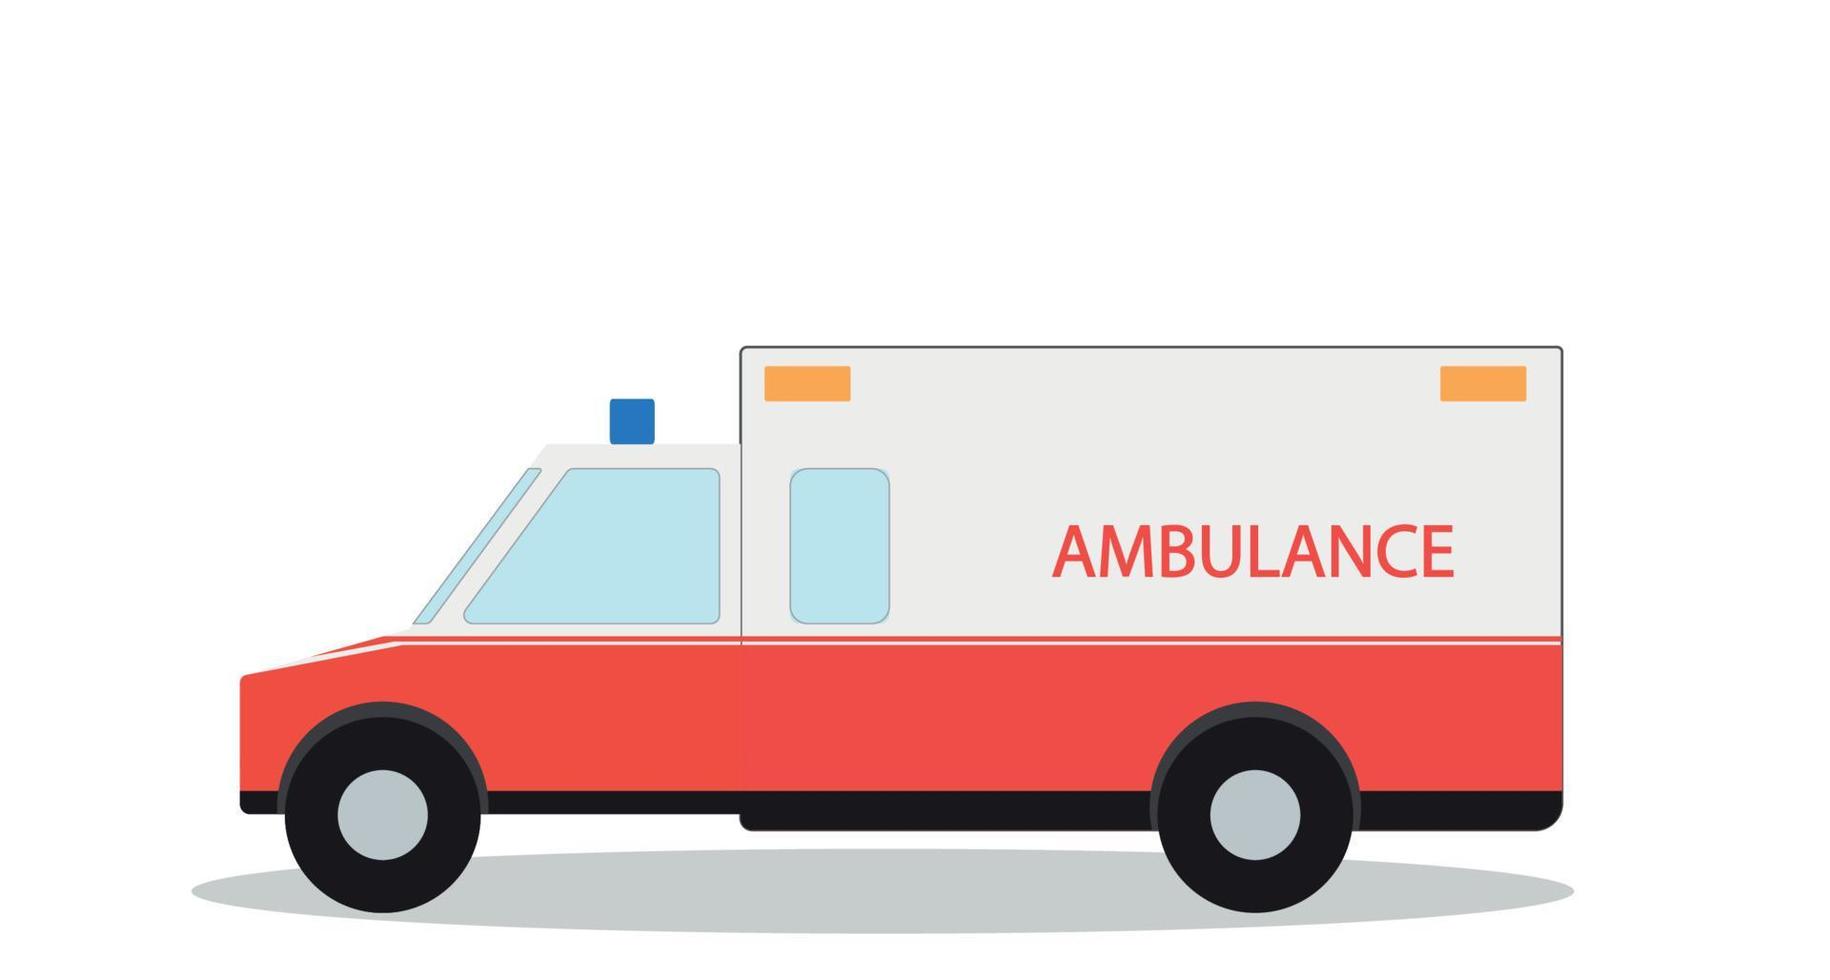 Colored Emergency Ambulance with Siren Flat Design. Vector Illustration.